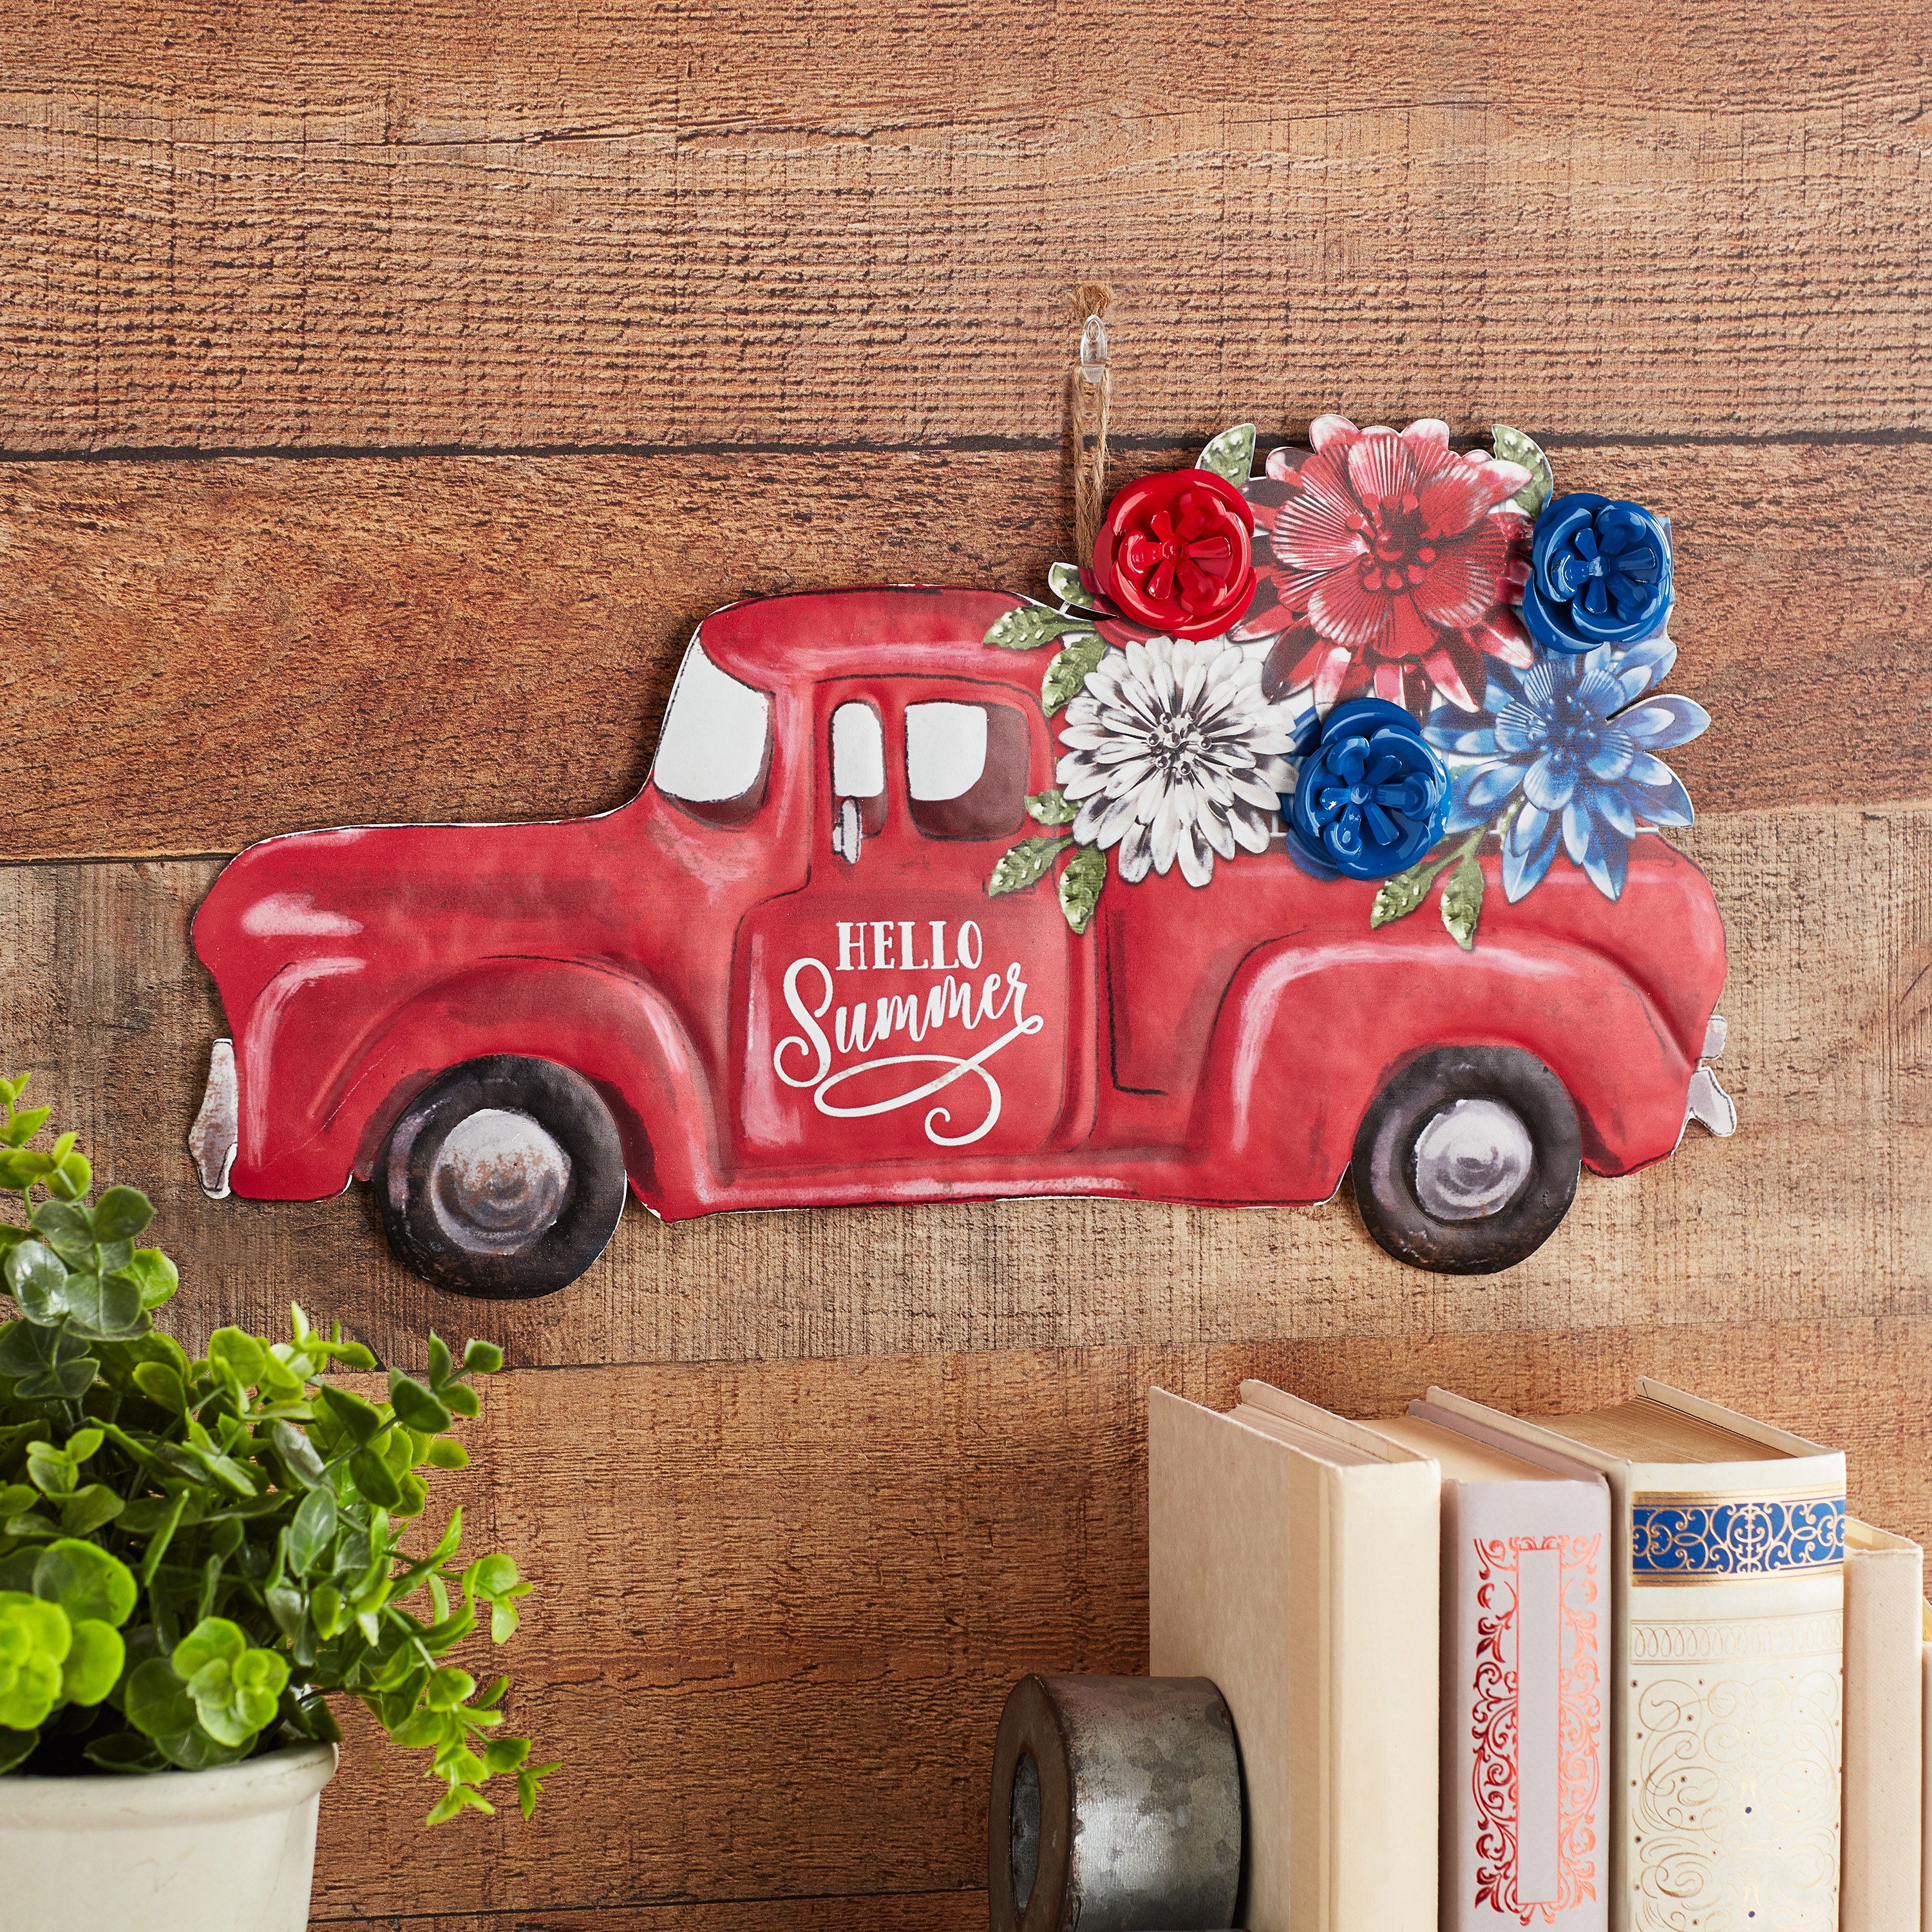 Download The Pioneer Woman Summer Decor At Walmart